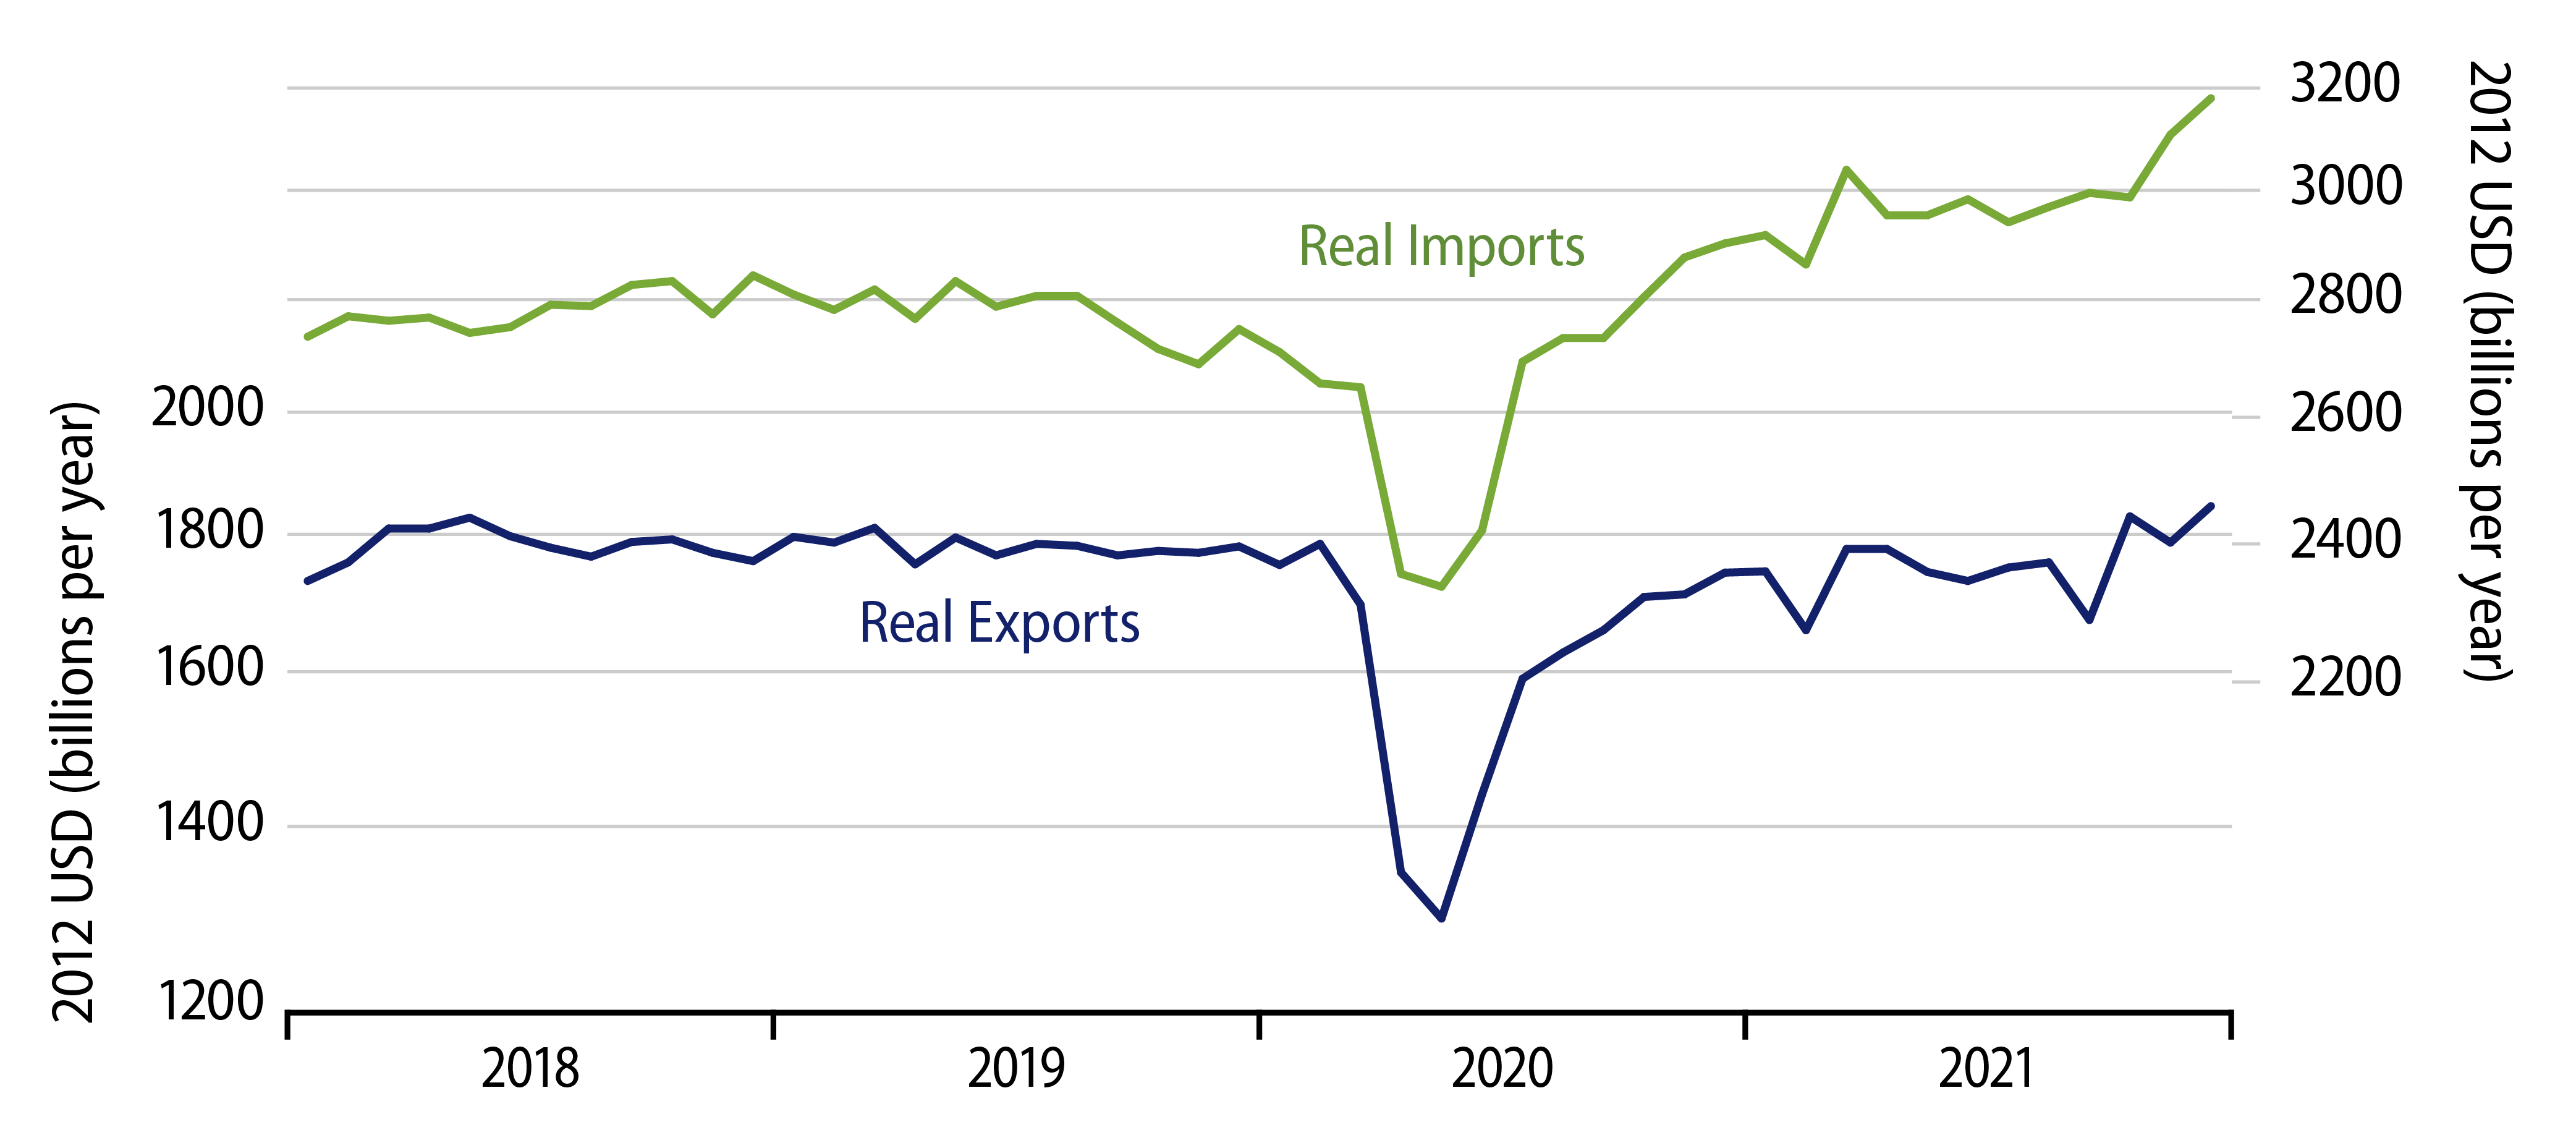 Real Exports and Imports Growth